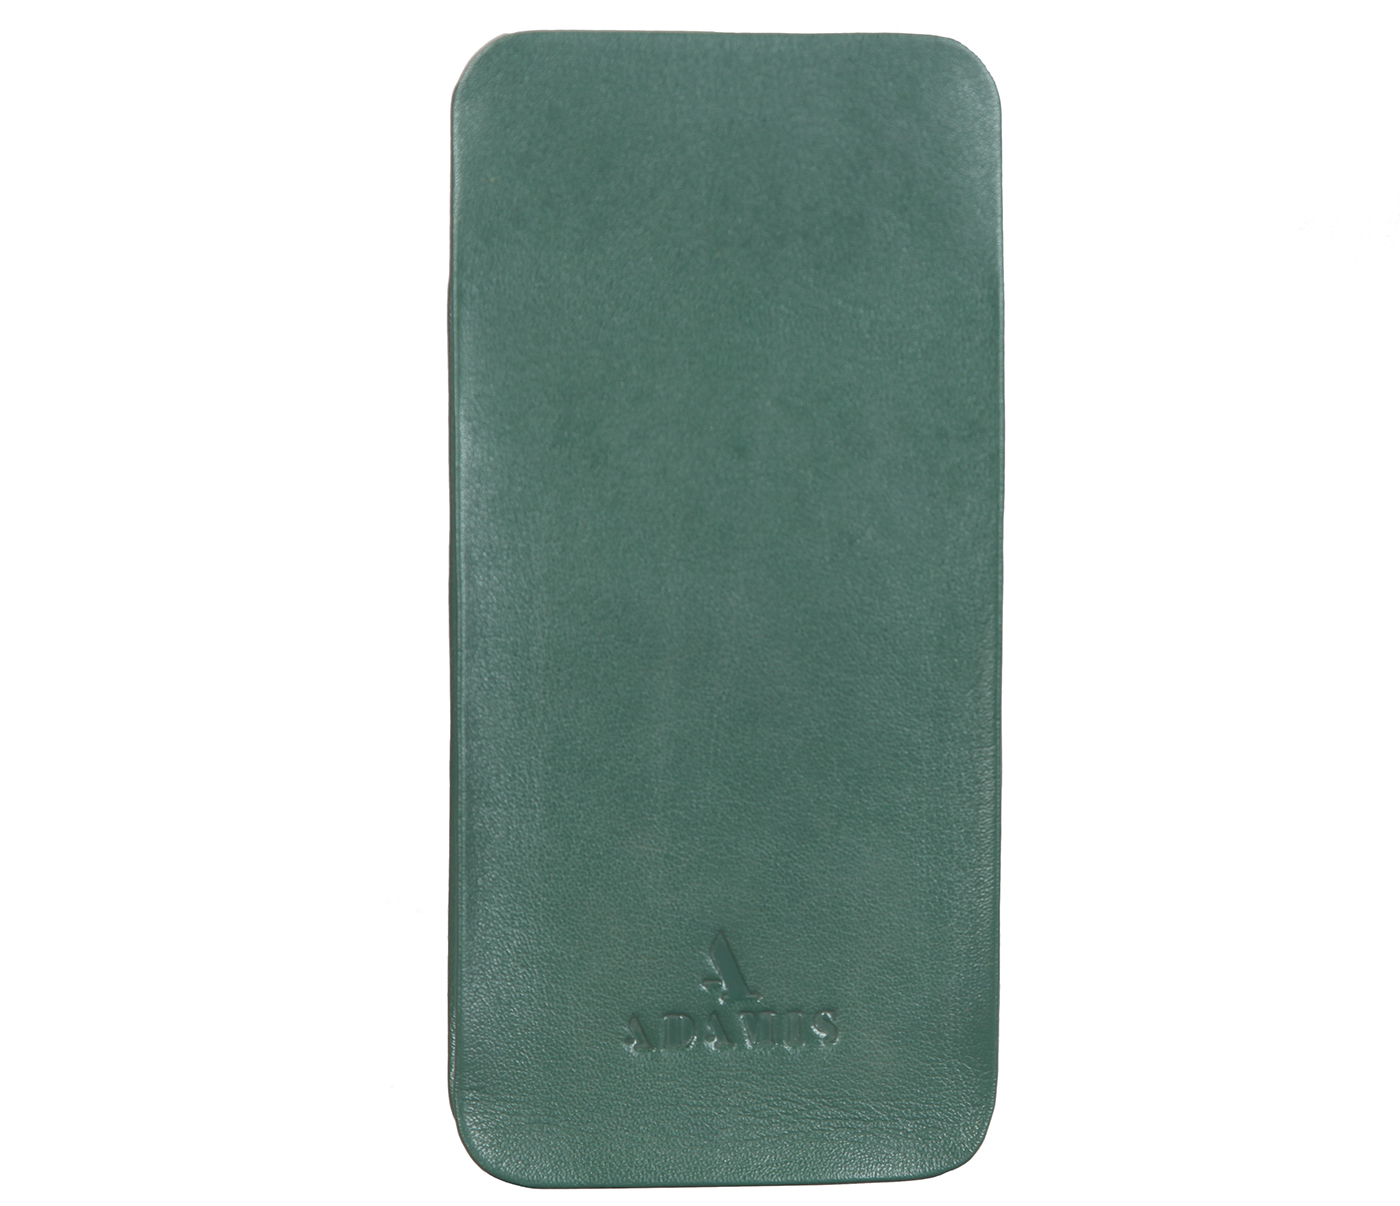 VW11--Soft stitch free spectacle case in Genuine Leather - Green